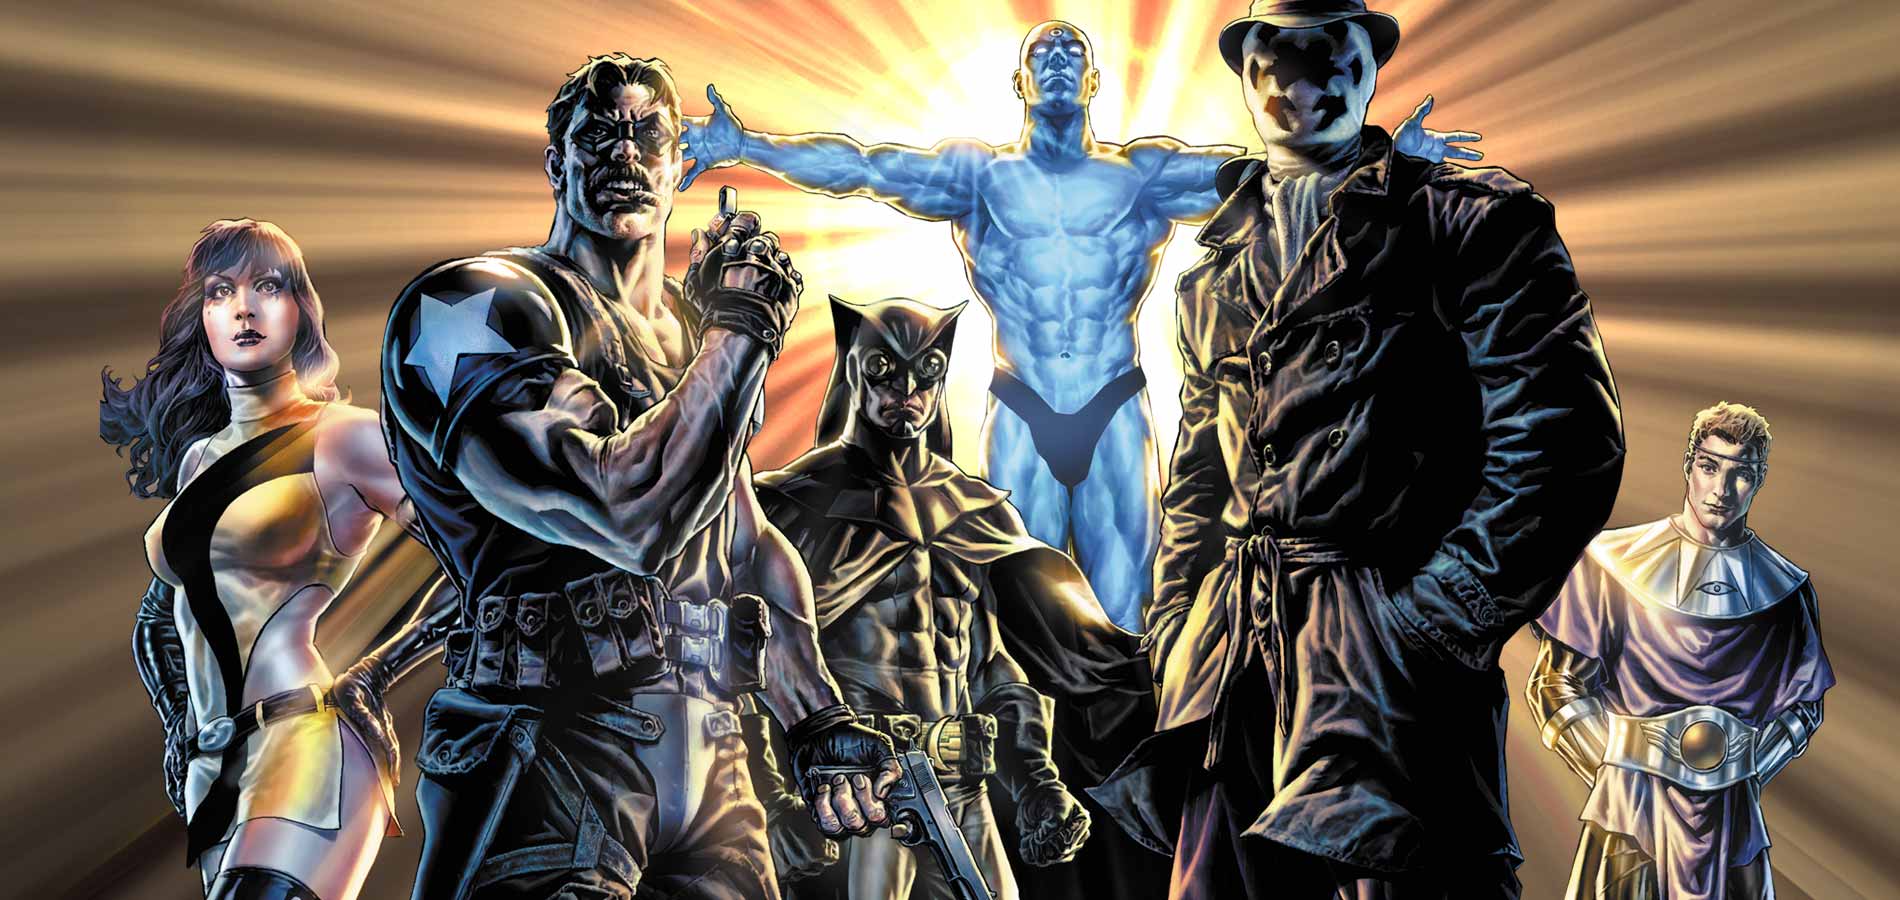 Someone broke NDA and revealed that an R-rated Watchmen animated movie is  coming